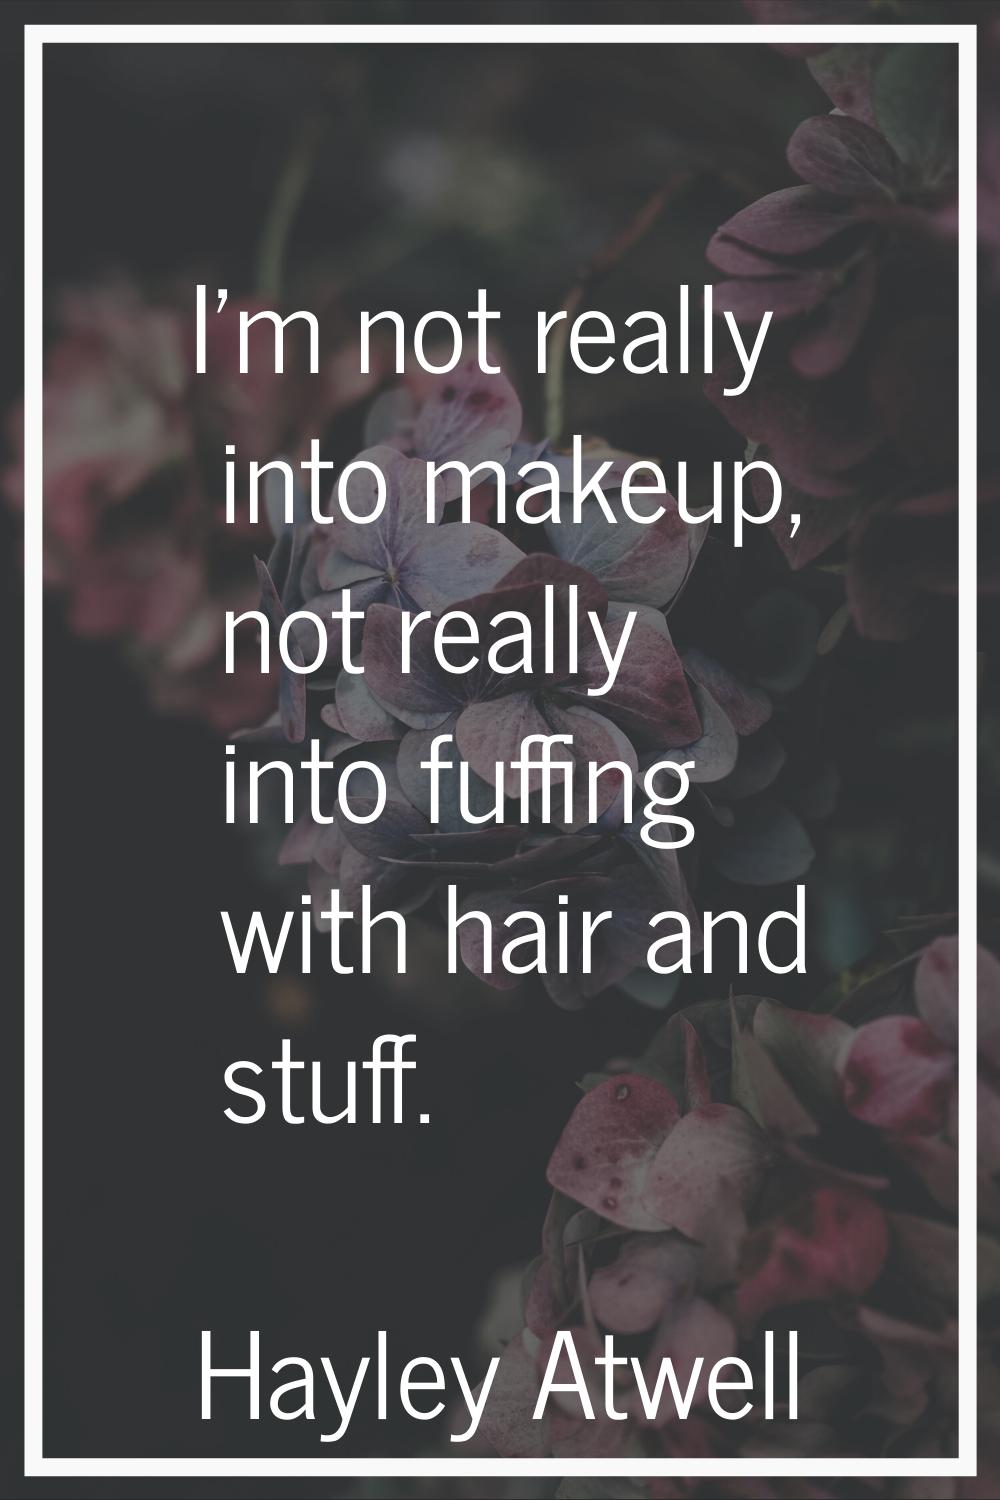 I'm not really into makeup, not really into fuffing with hair and stuff.